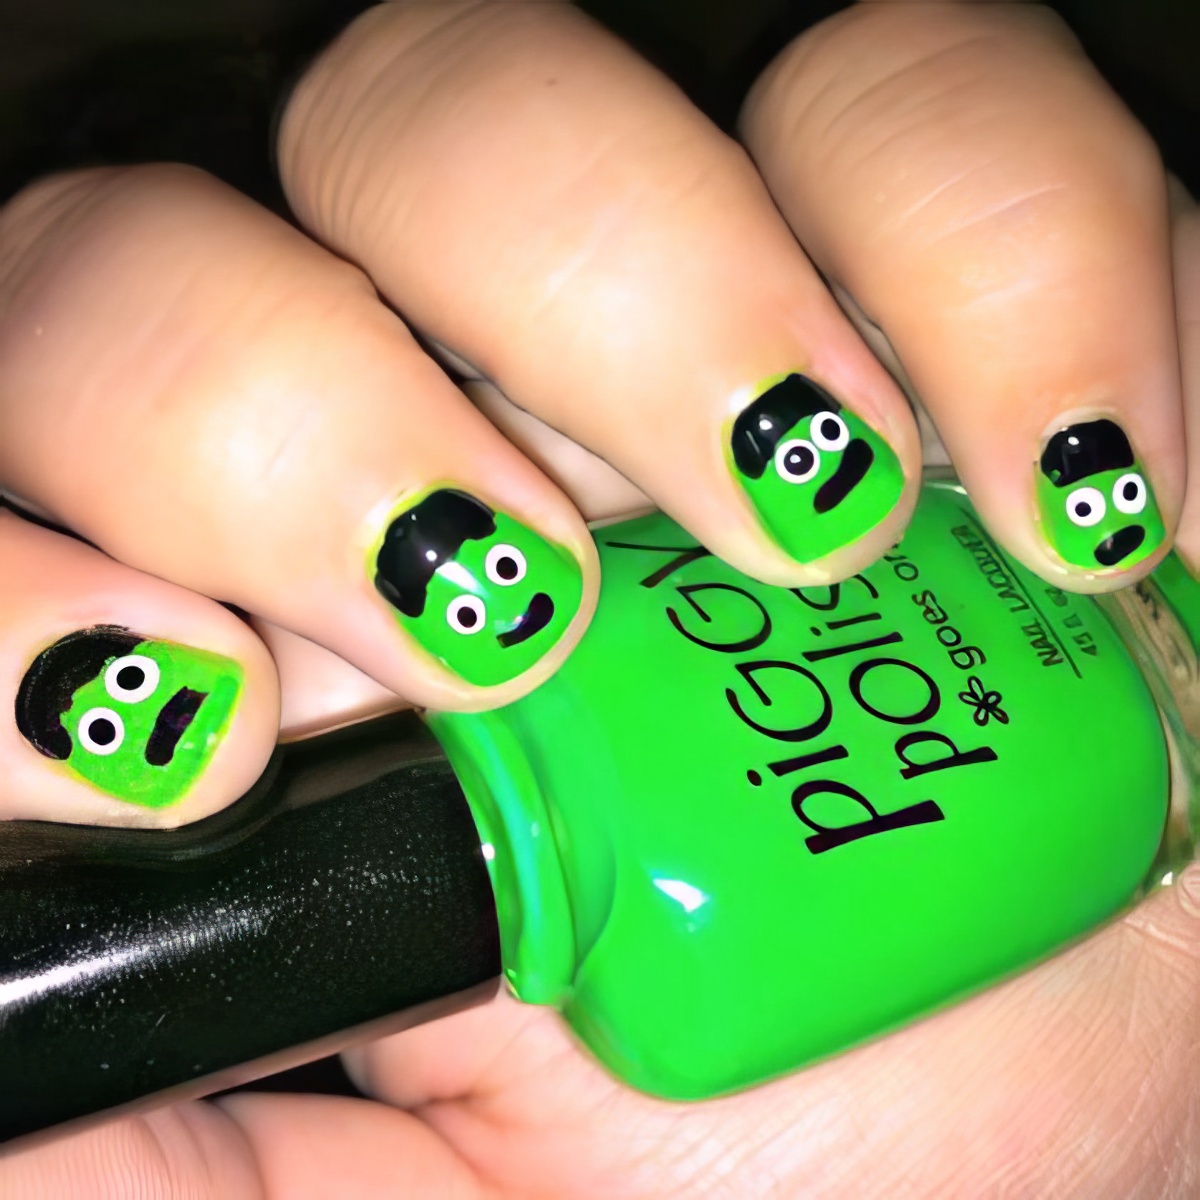 Do this easy and bright Frankenstein nails with the girls this Halloween!